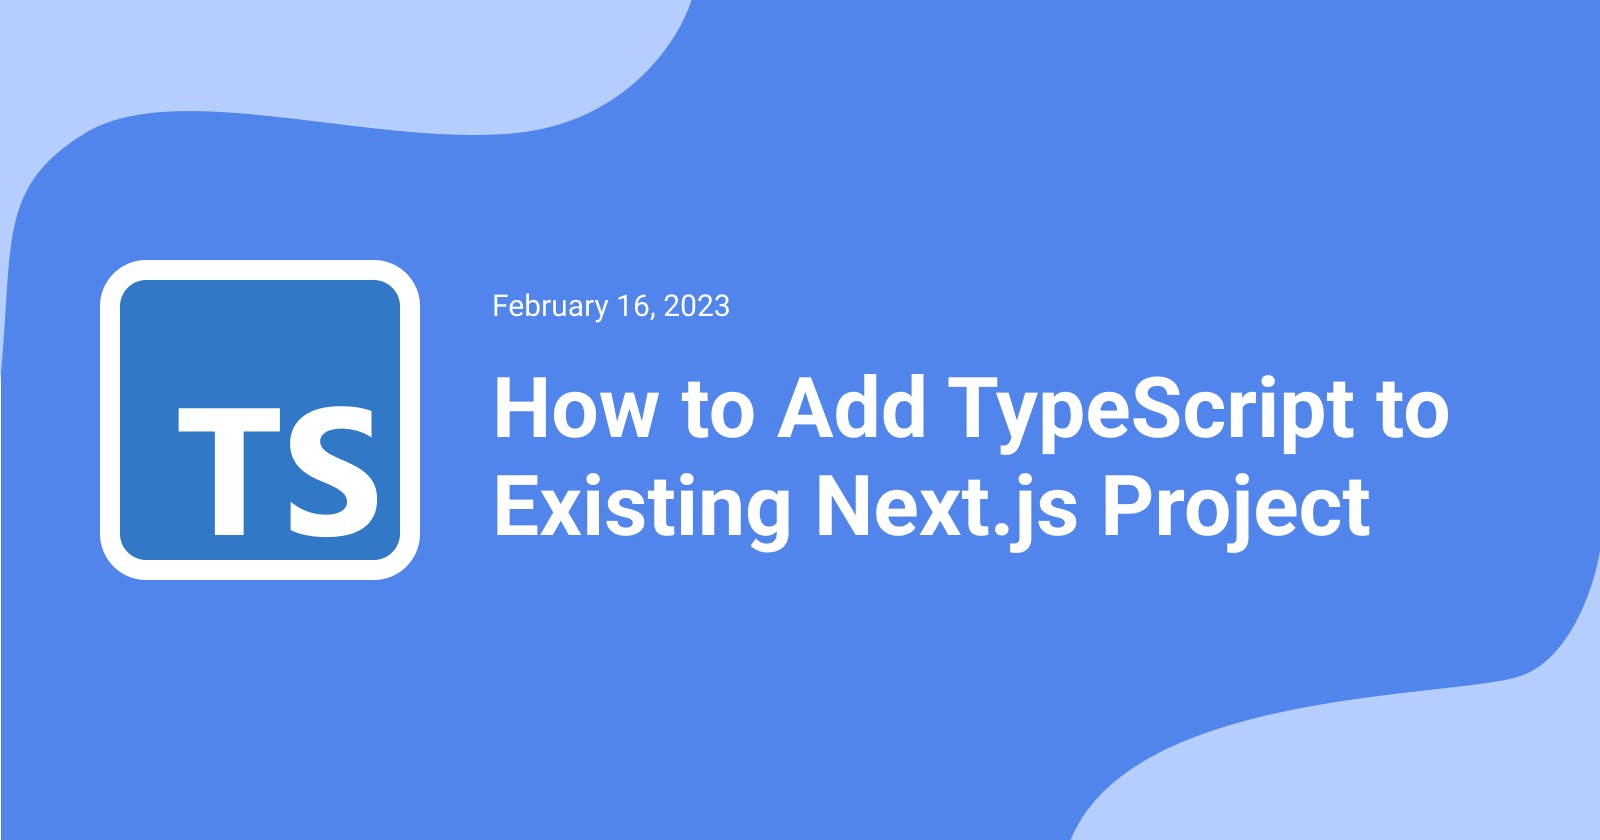 How to Add TypeScript to Existing Next.js Project